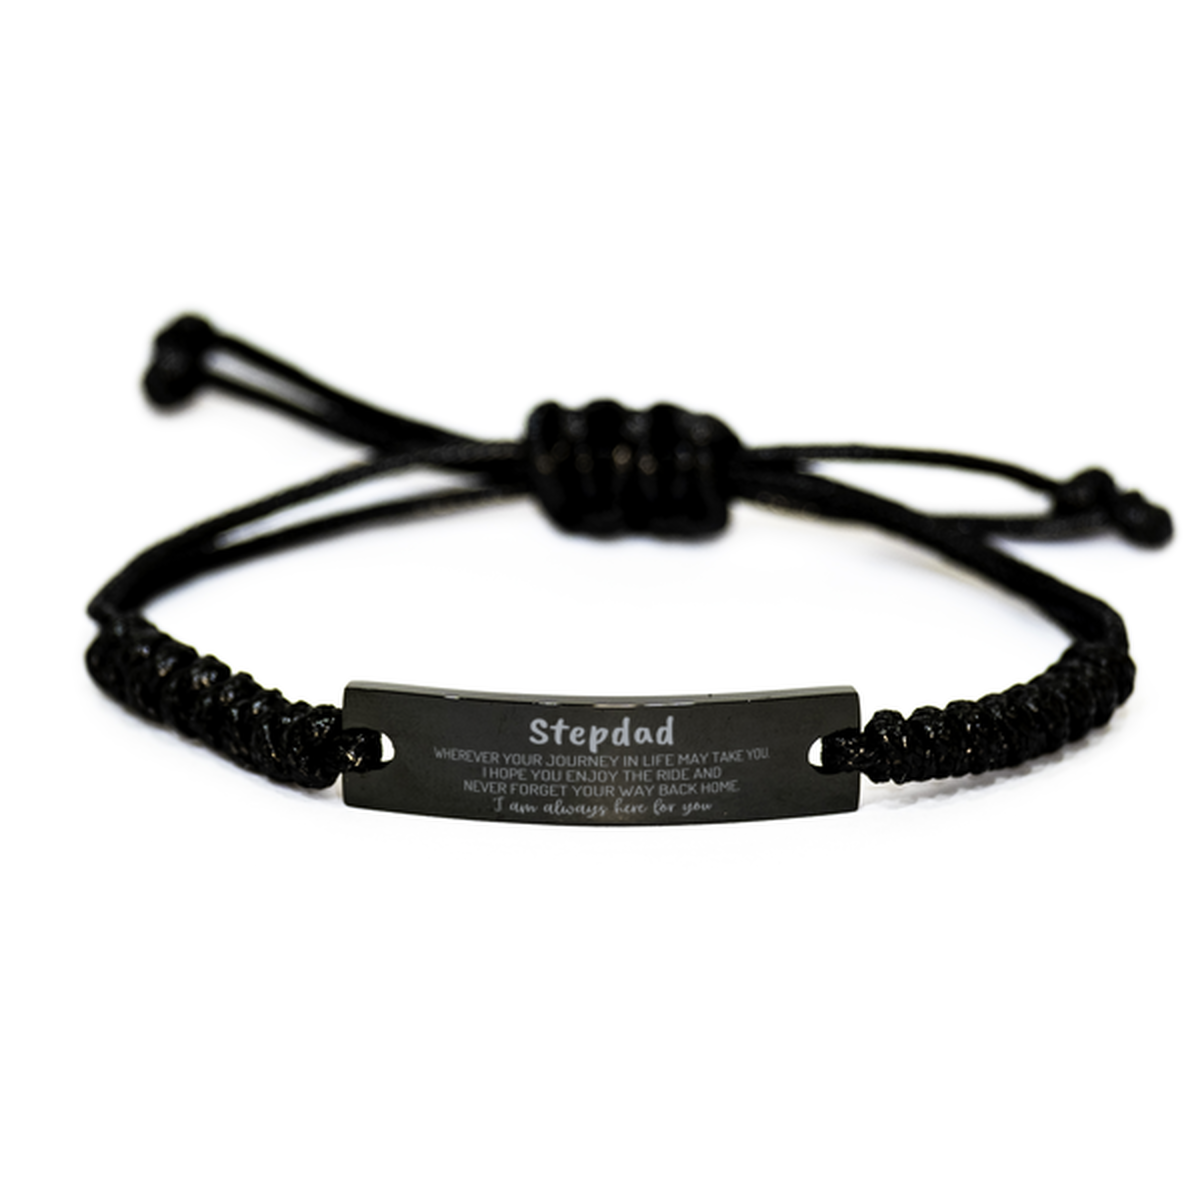 Stepdad wherever your journey in life may take you, I am always here for you Stepdad Black Rope Bracelet, Awesome Christmas Gifts For Stepdad, Stepdad Birthday Gifts for Men Women Family Loved One